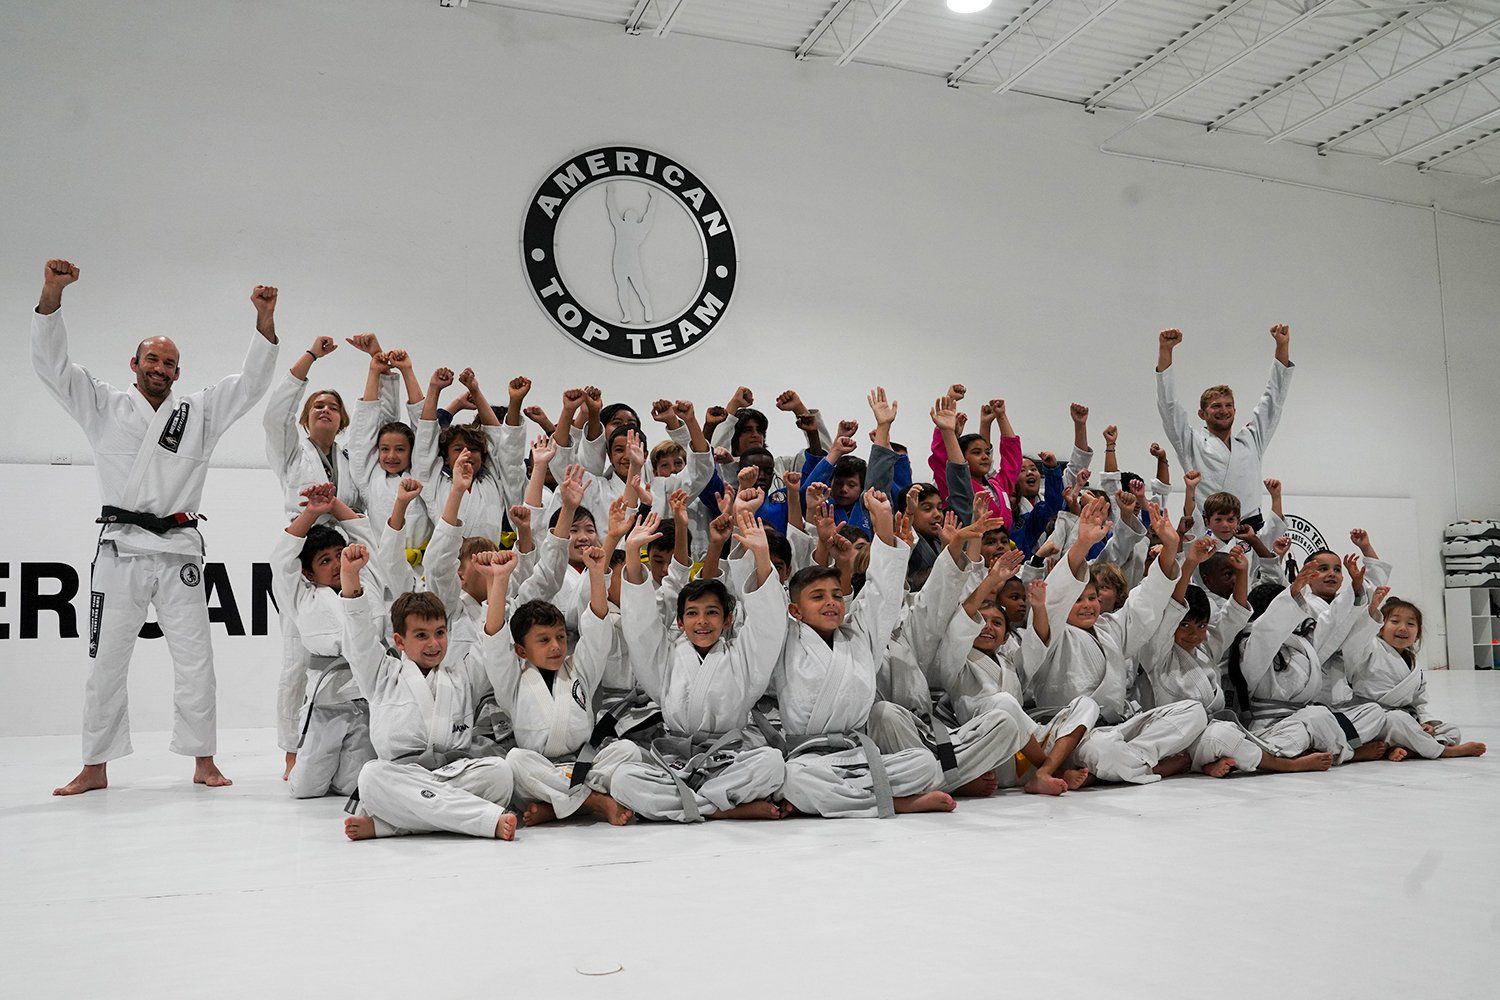 Team photo with Randy Barroso and his youth BJJ class at American Top Team Aventura/NMB